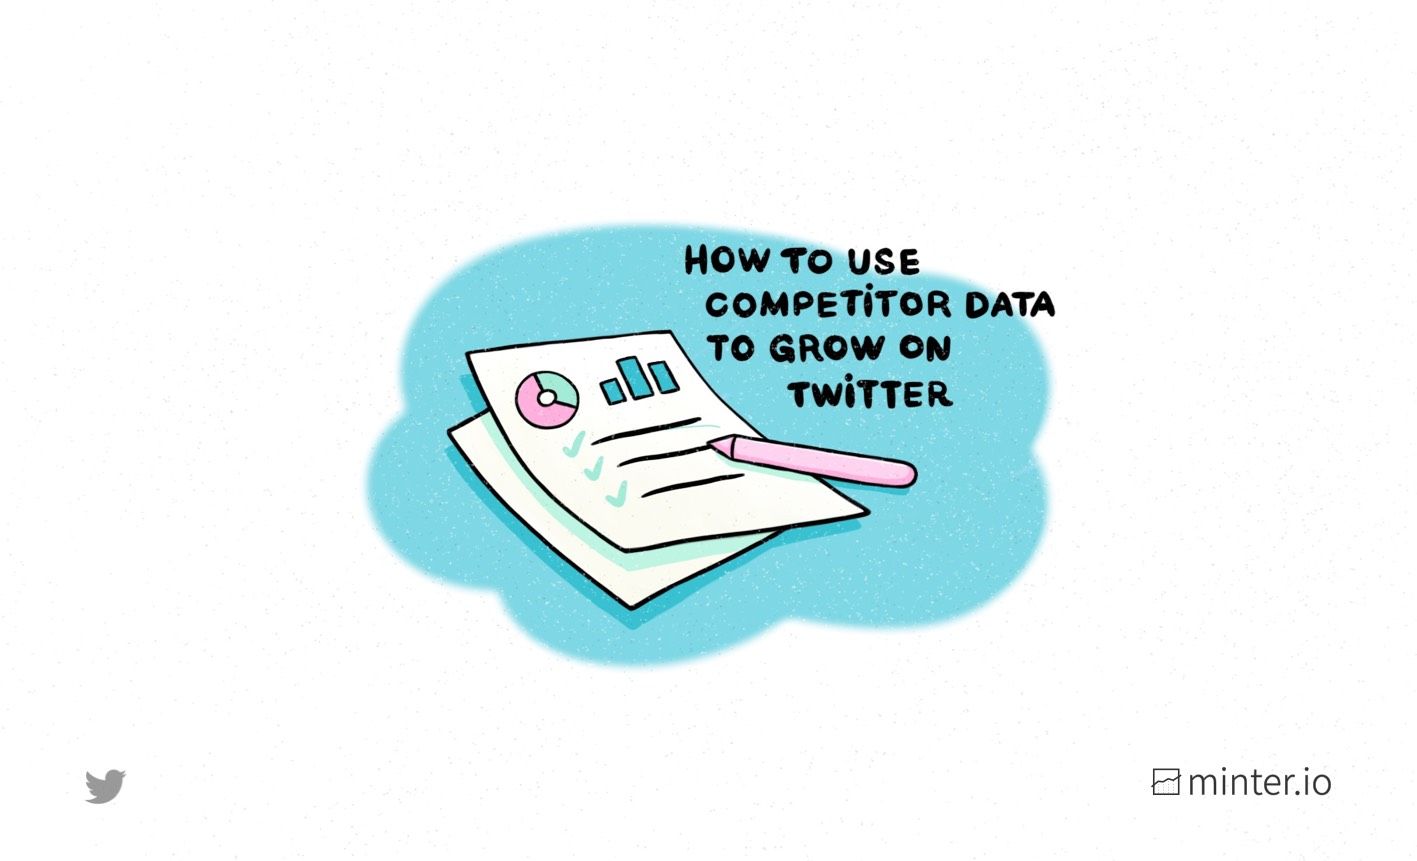 How to use competitor data to grow on Twitter